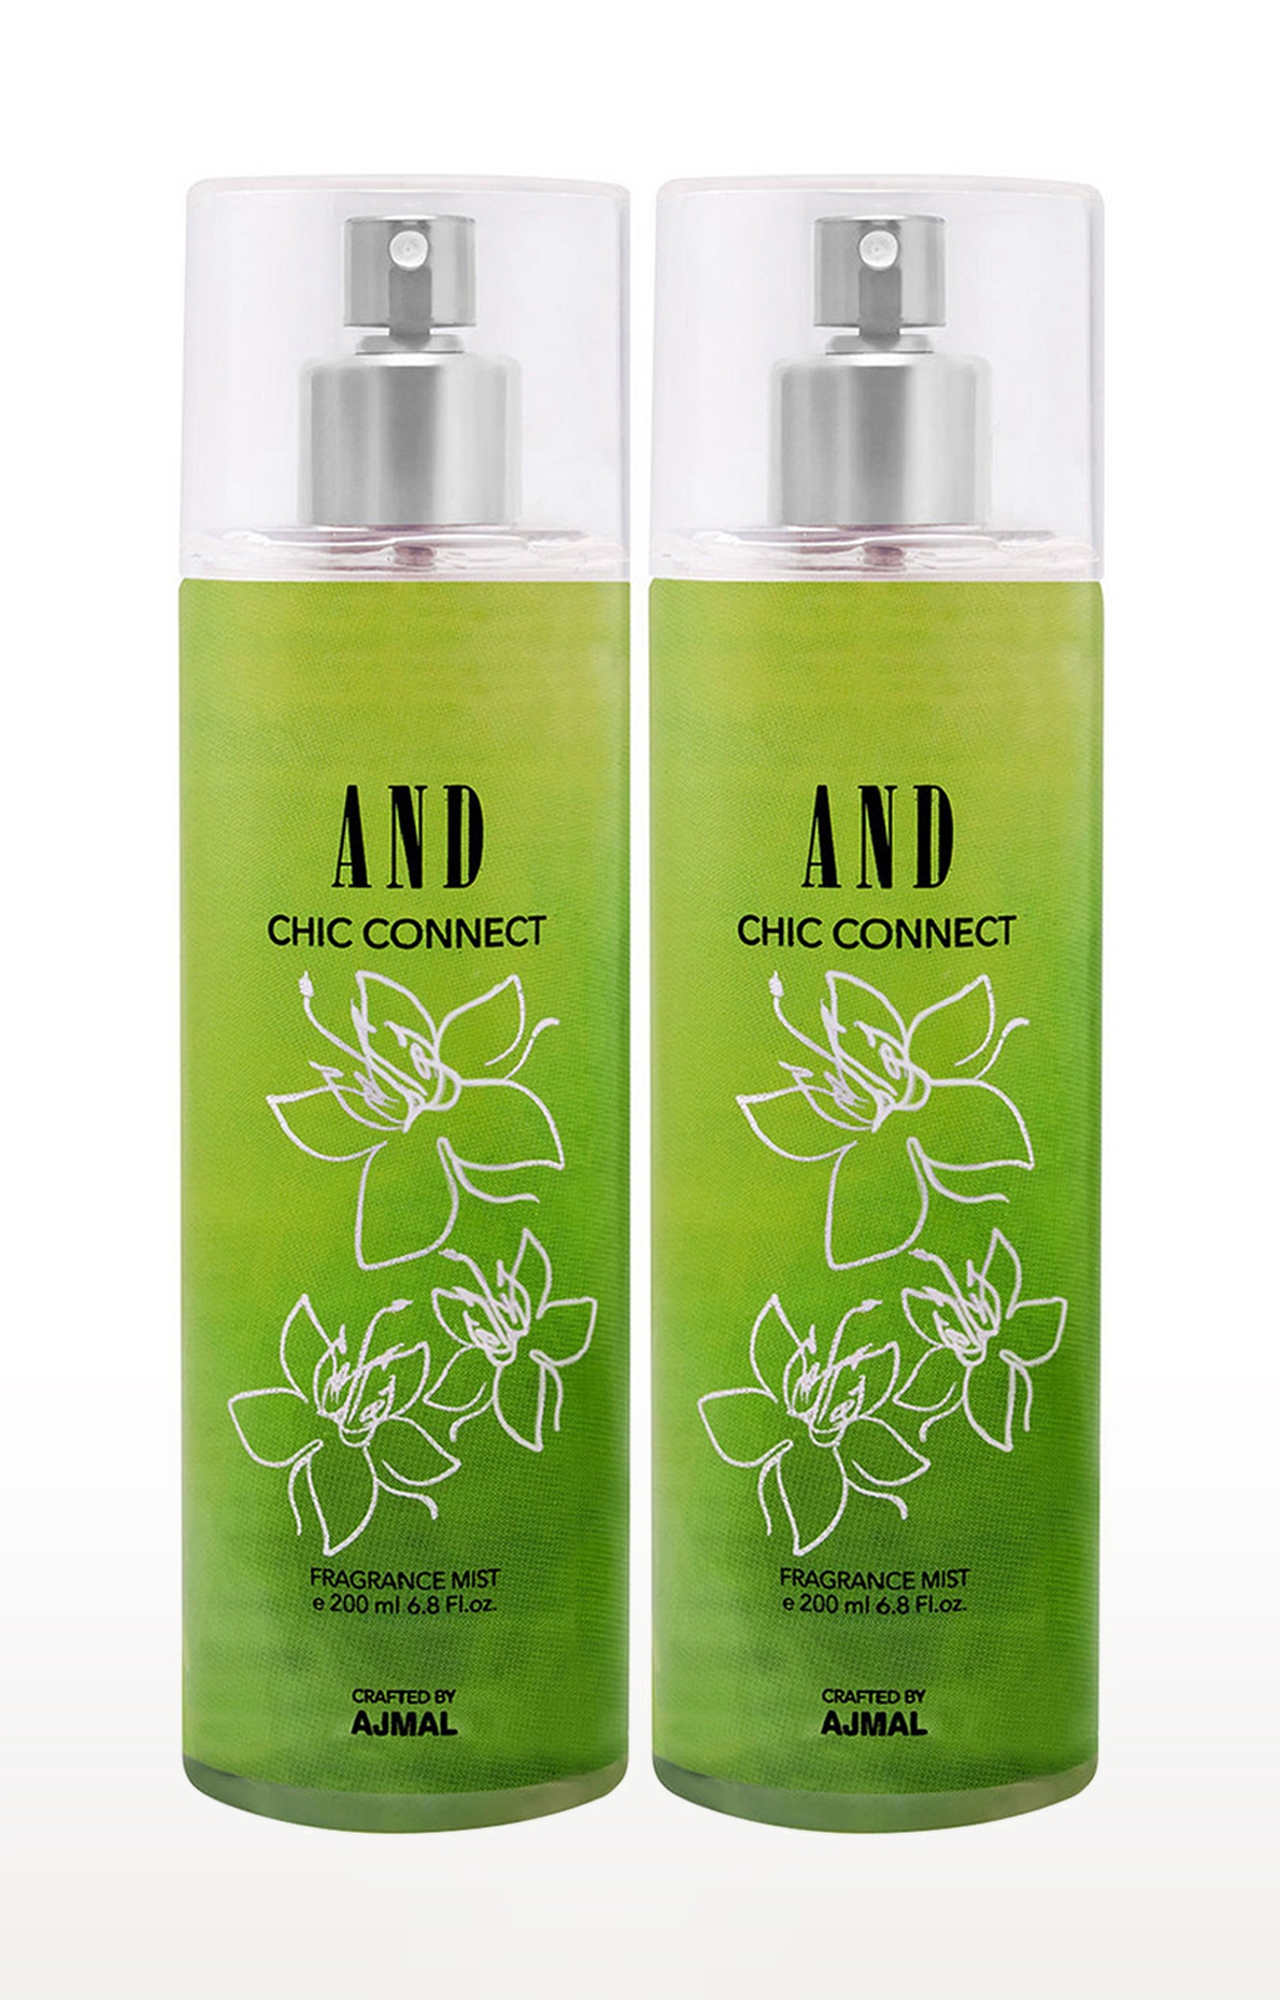 AND Crafted By Ajmal | AND Chic Connect & Chic Connect Pack of 2 Body Mist 200ML each Long Lasting Scent Spray Gift For Women Perfume Crafted by Ajmal FREE